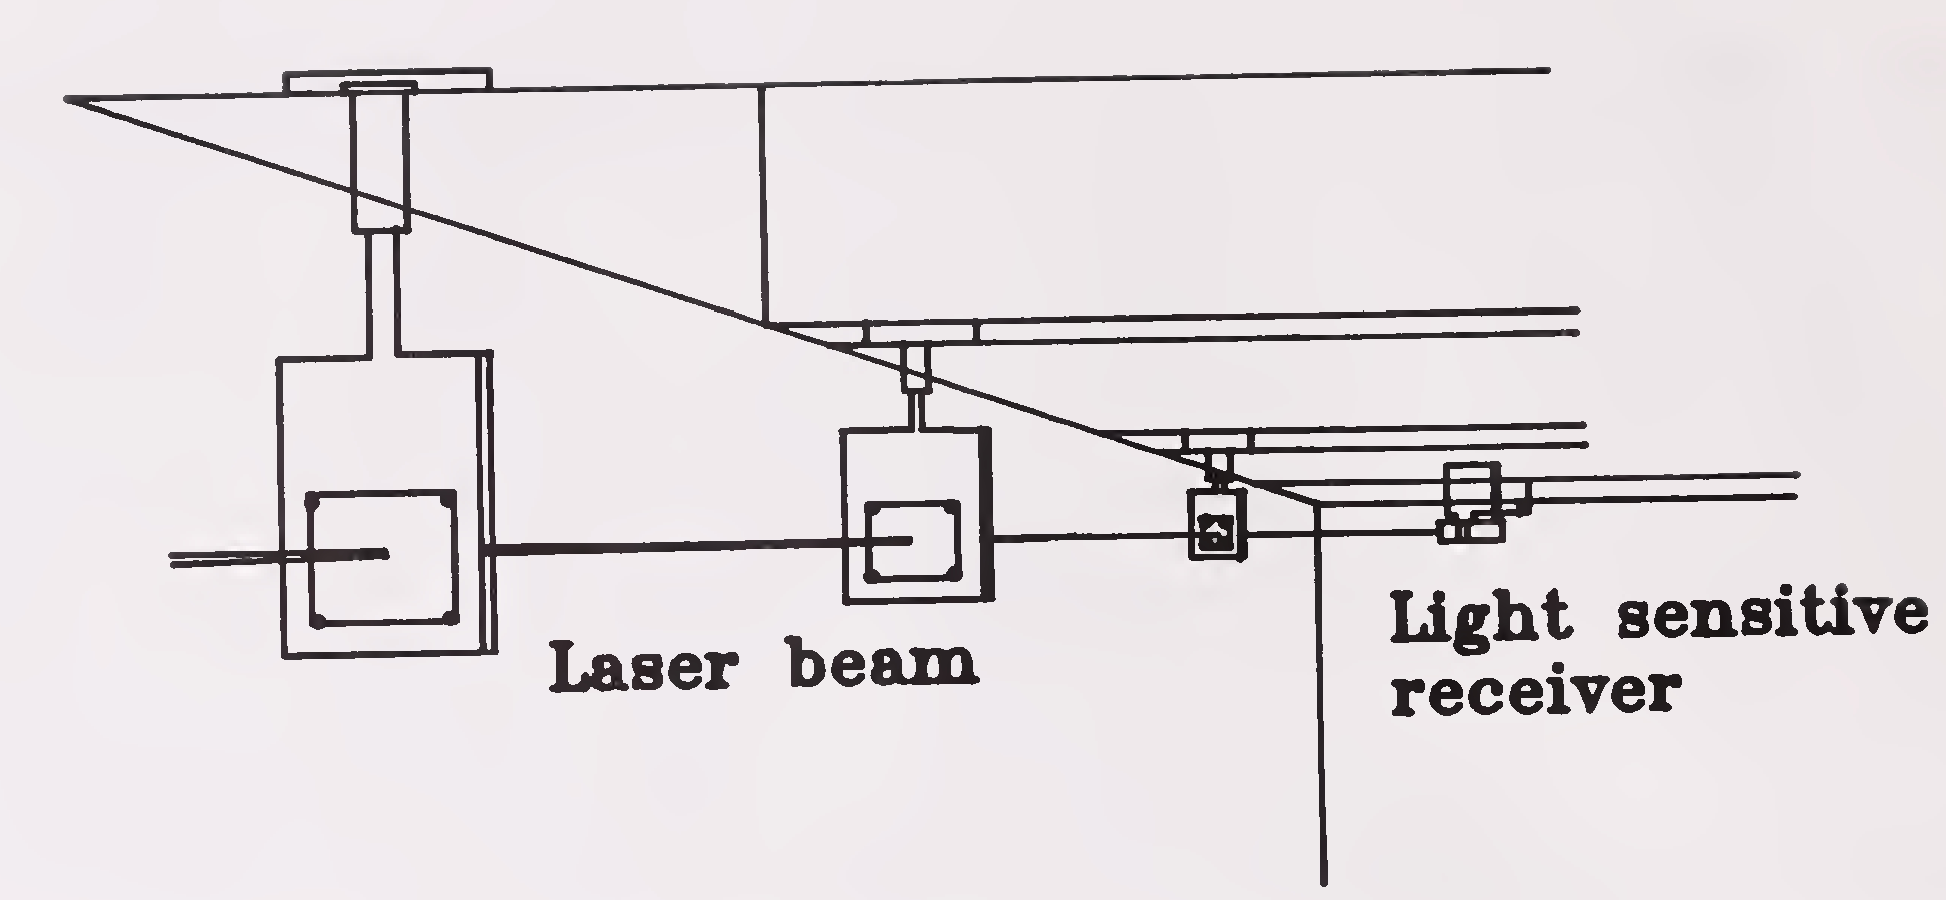 Fig.9.1 Laser monitoring of deck girders